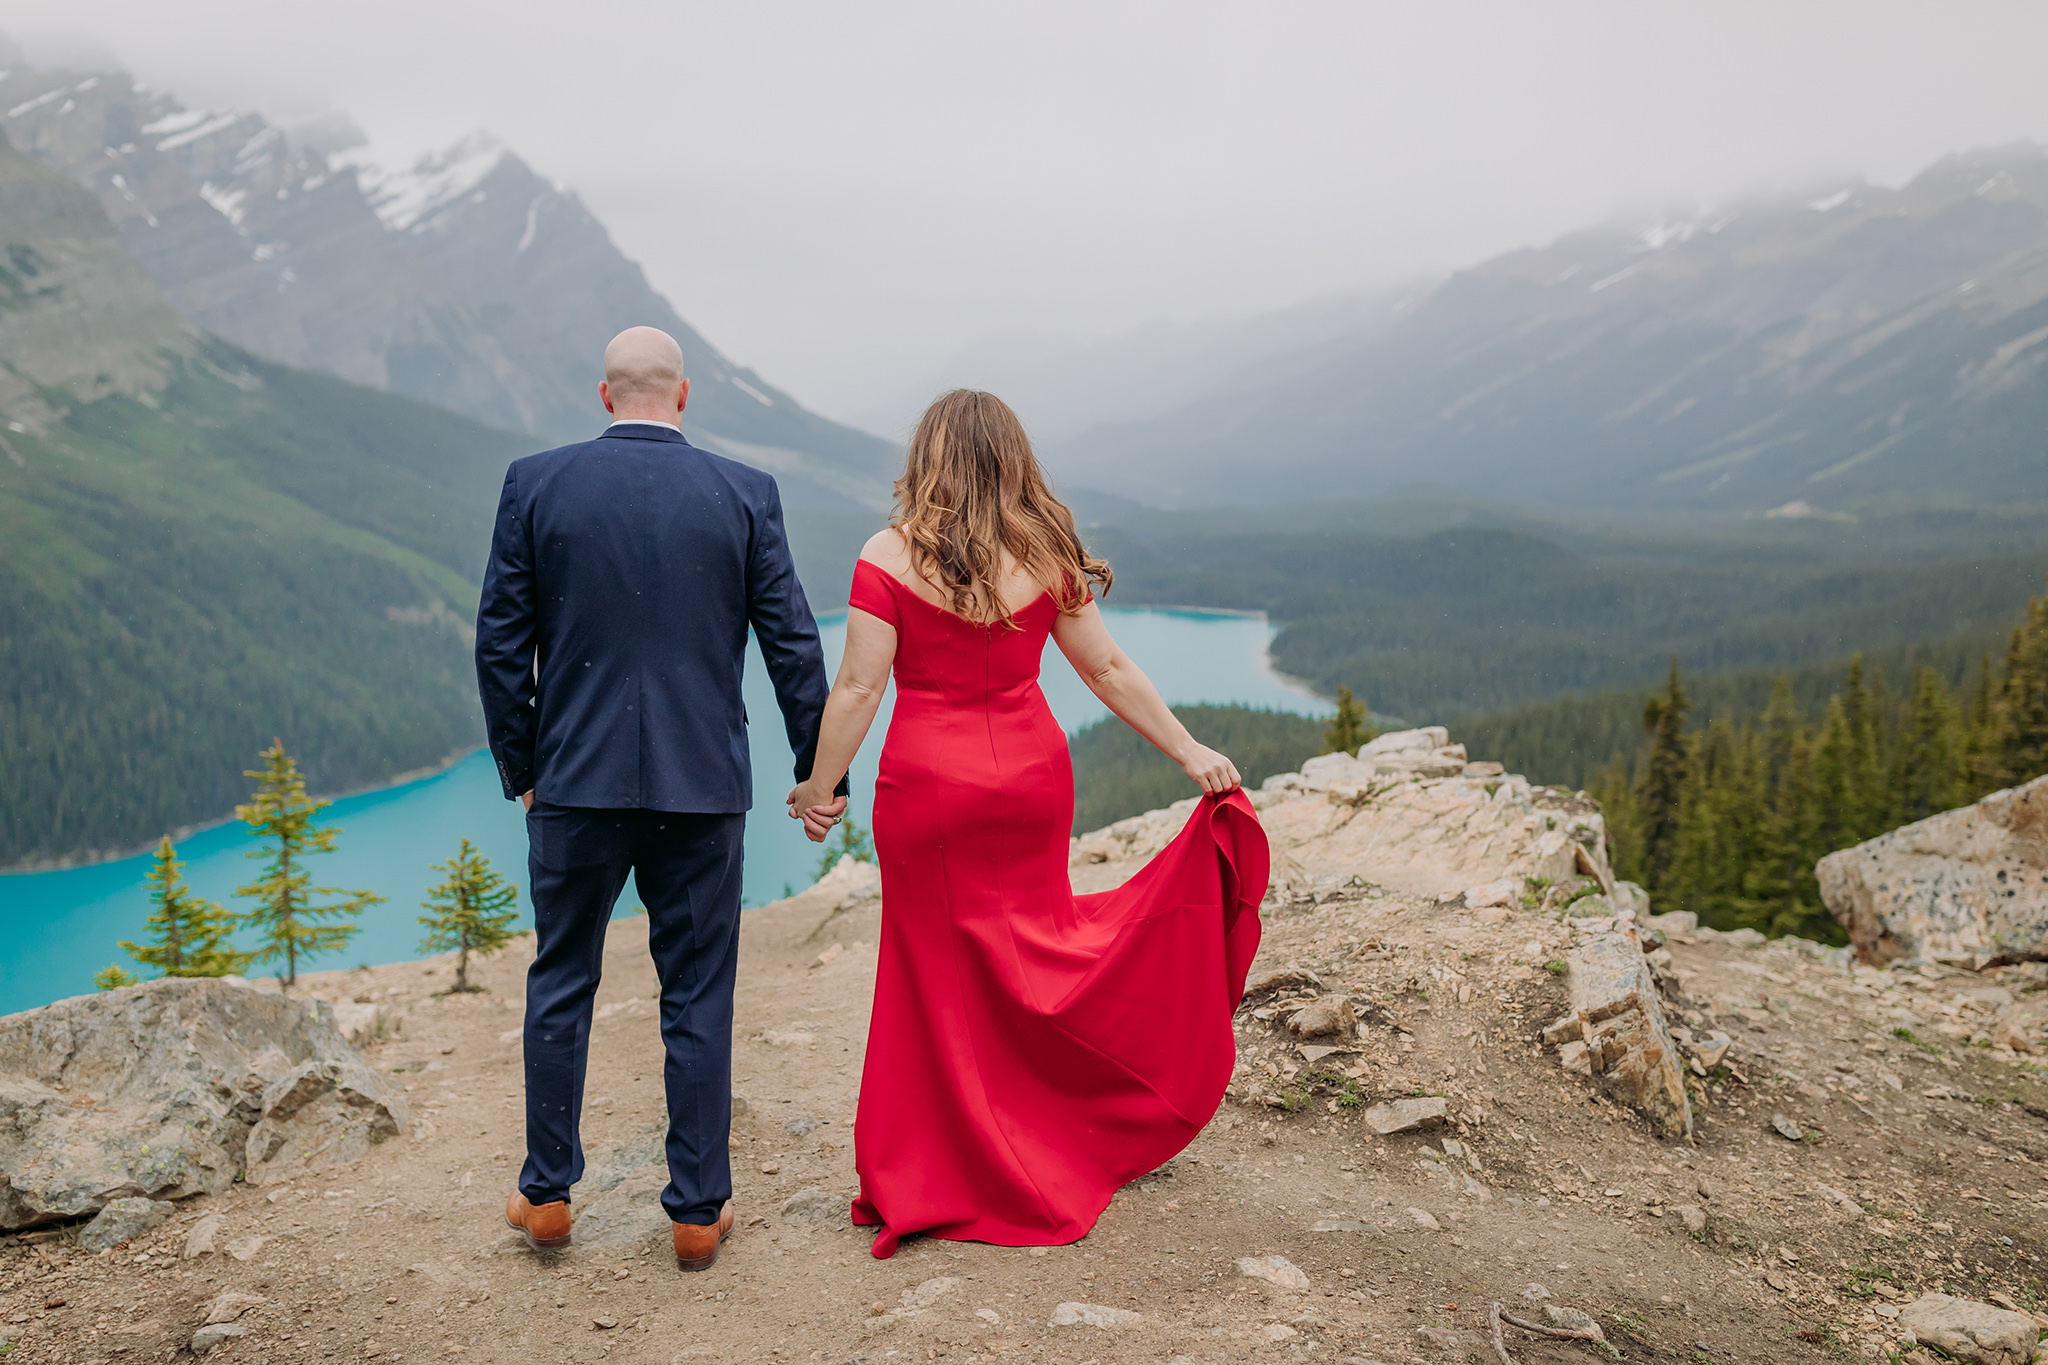 Peyto Lake Formal engagement photos on a cold rainy day in the mountains in Banff National Park. Featuring stunning red evening gown & dramatic blue lake backdrop photographed by ENV Photography